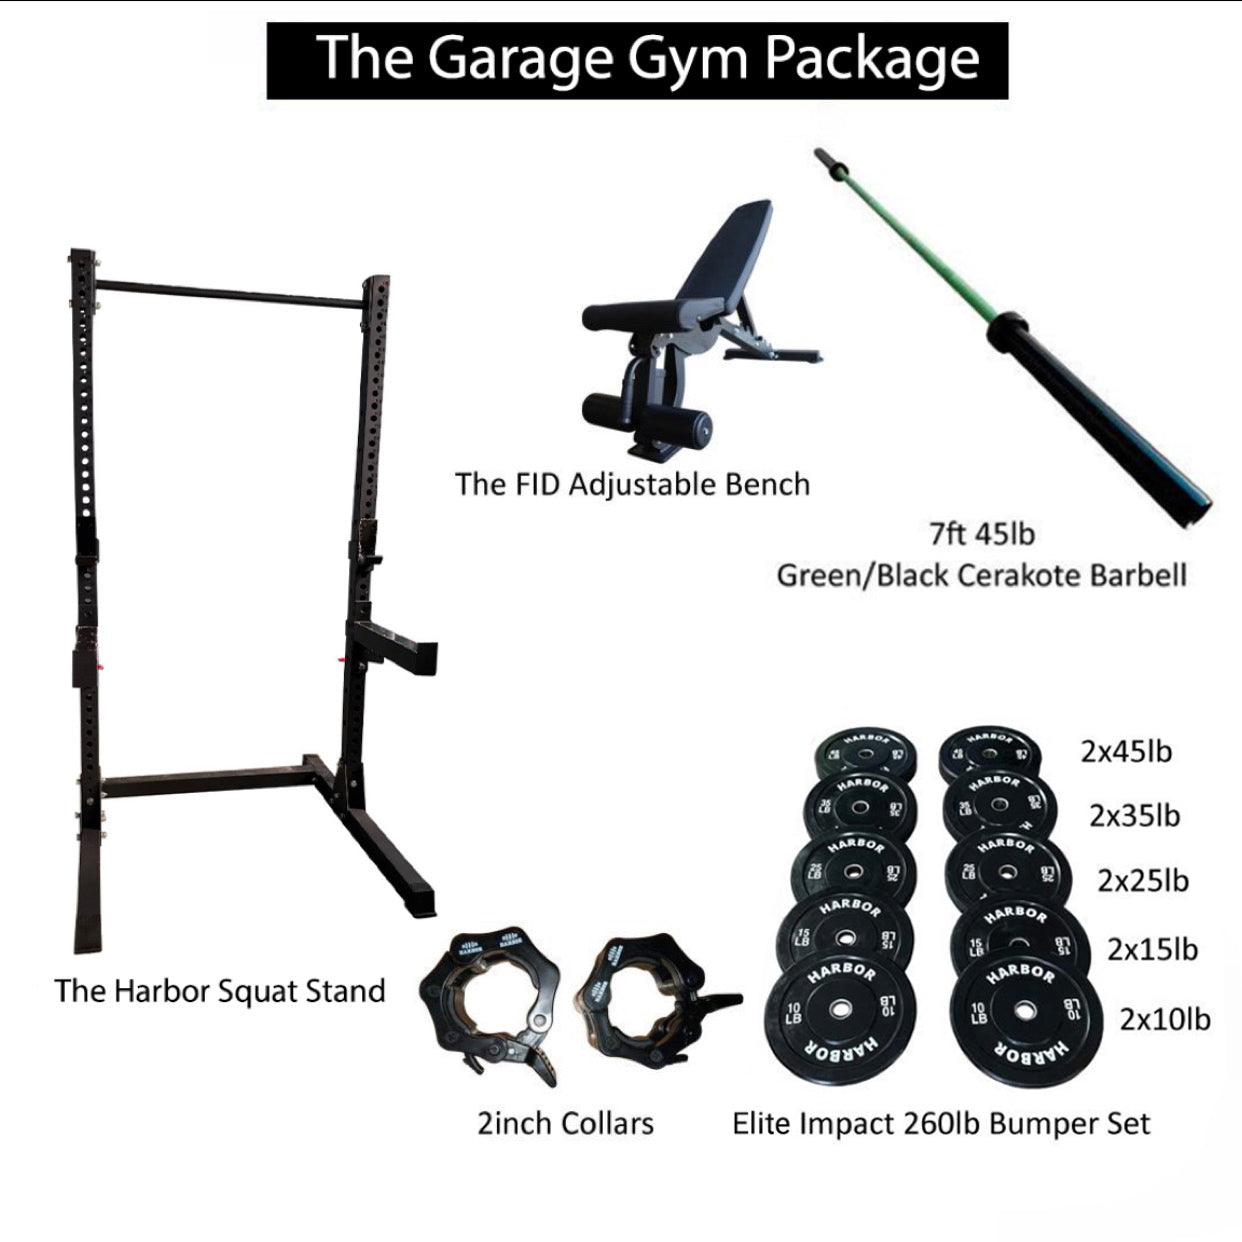 The Harbor Garage Gym Package